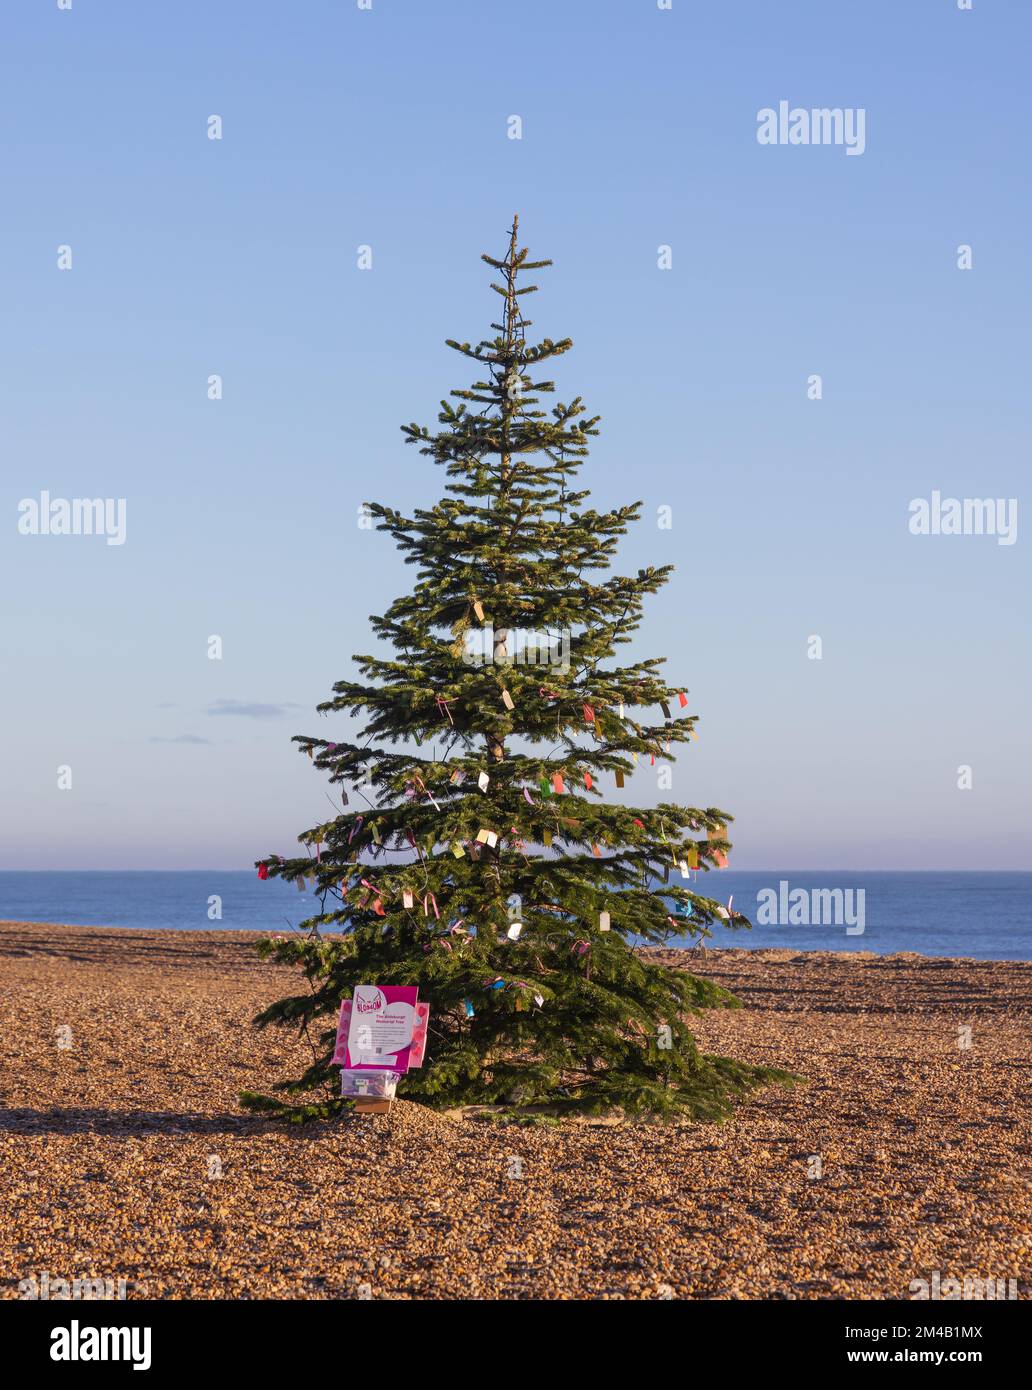 The Aldeburgh Memorial Christmas tree on the beach in aid of the Blossom Appeal. Aldeburgh, Suffolk. UK Stock Photo